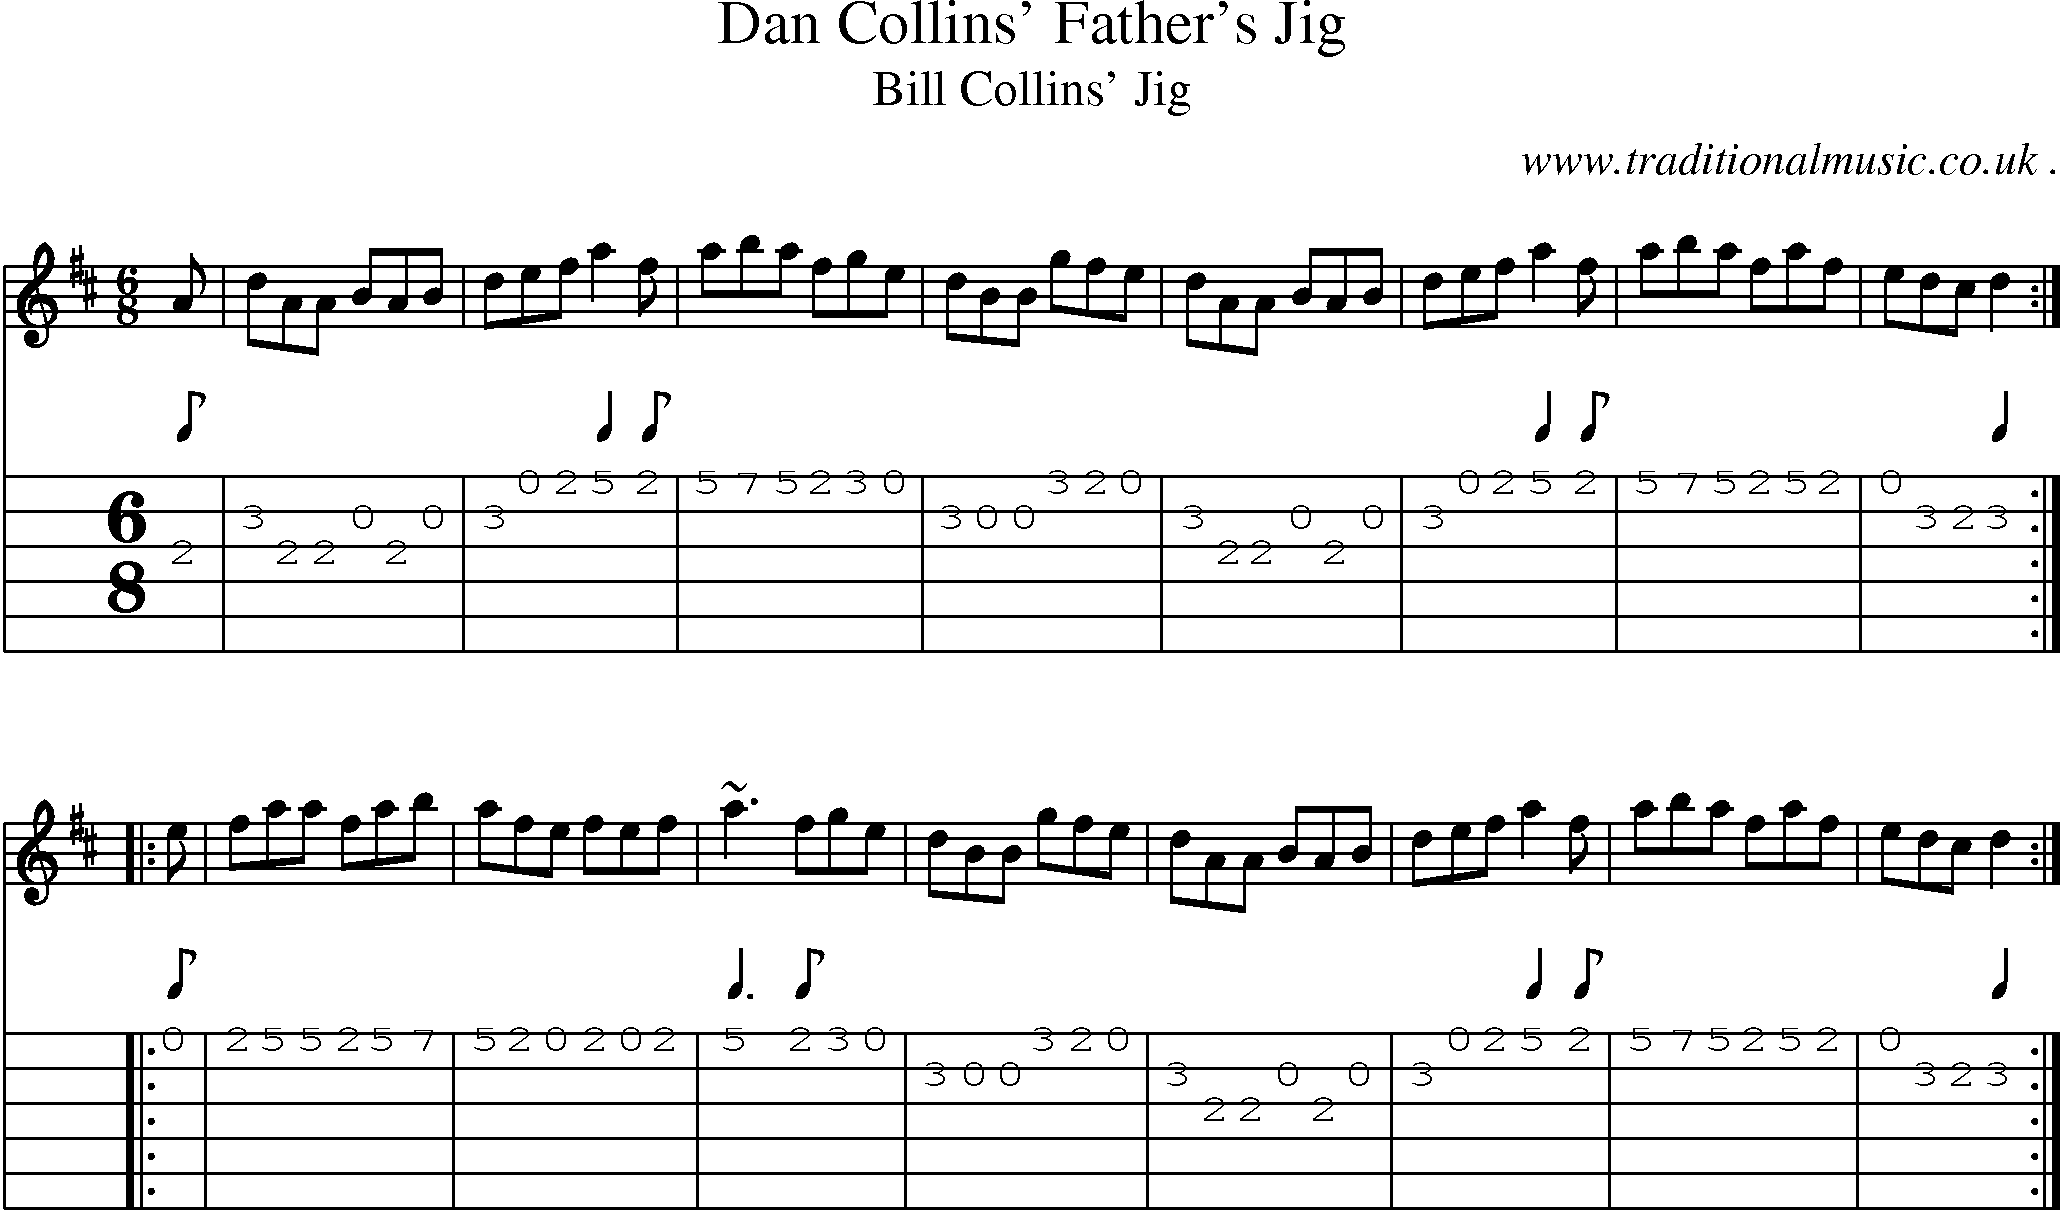 Sheet-music  score, Chords and Guitar Tabs for Dan Collins Fathers Jig